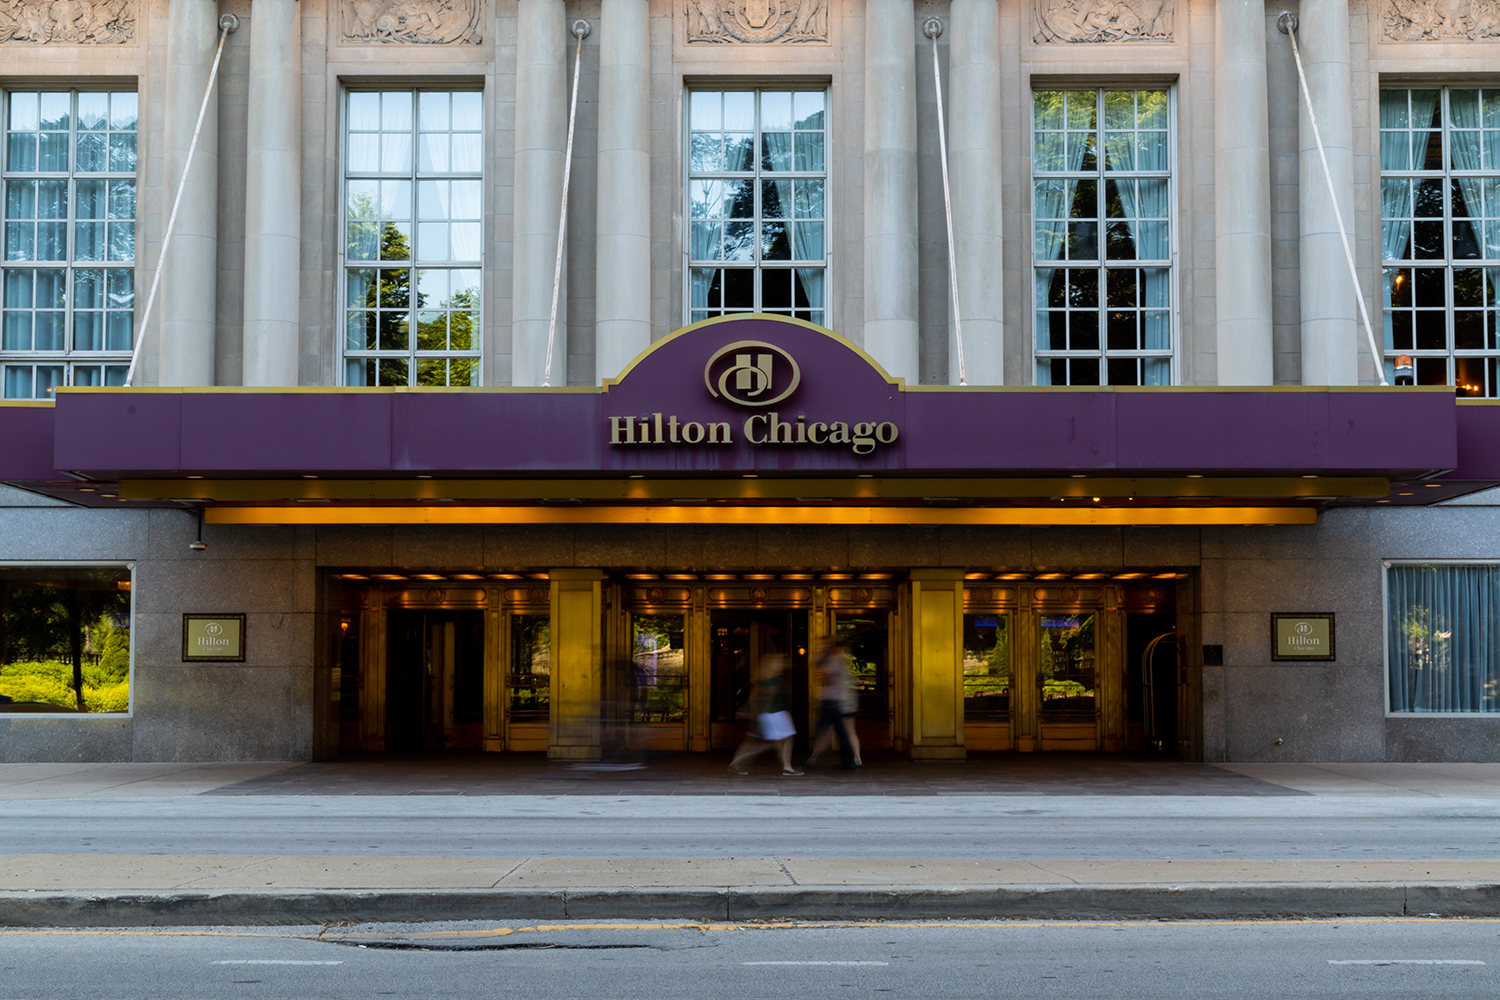 The Hilton Chicago reopens, bringing jobs, more business to the South